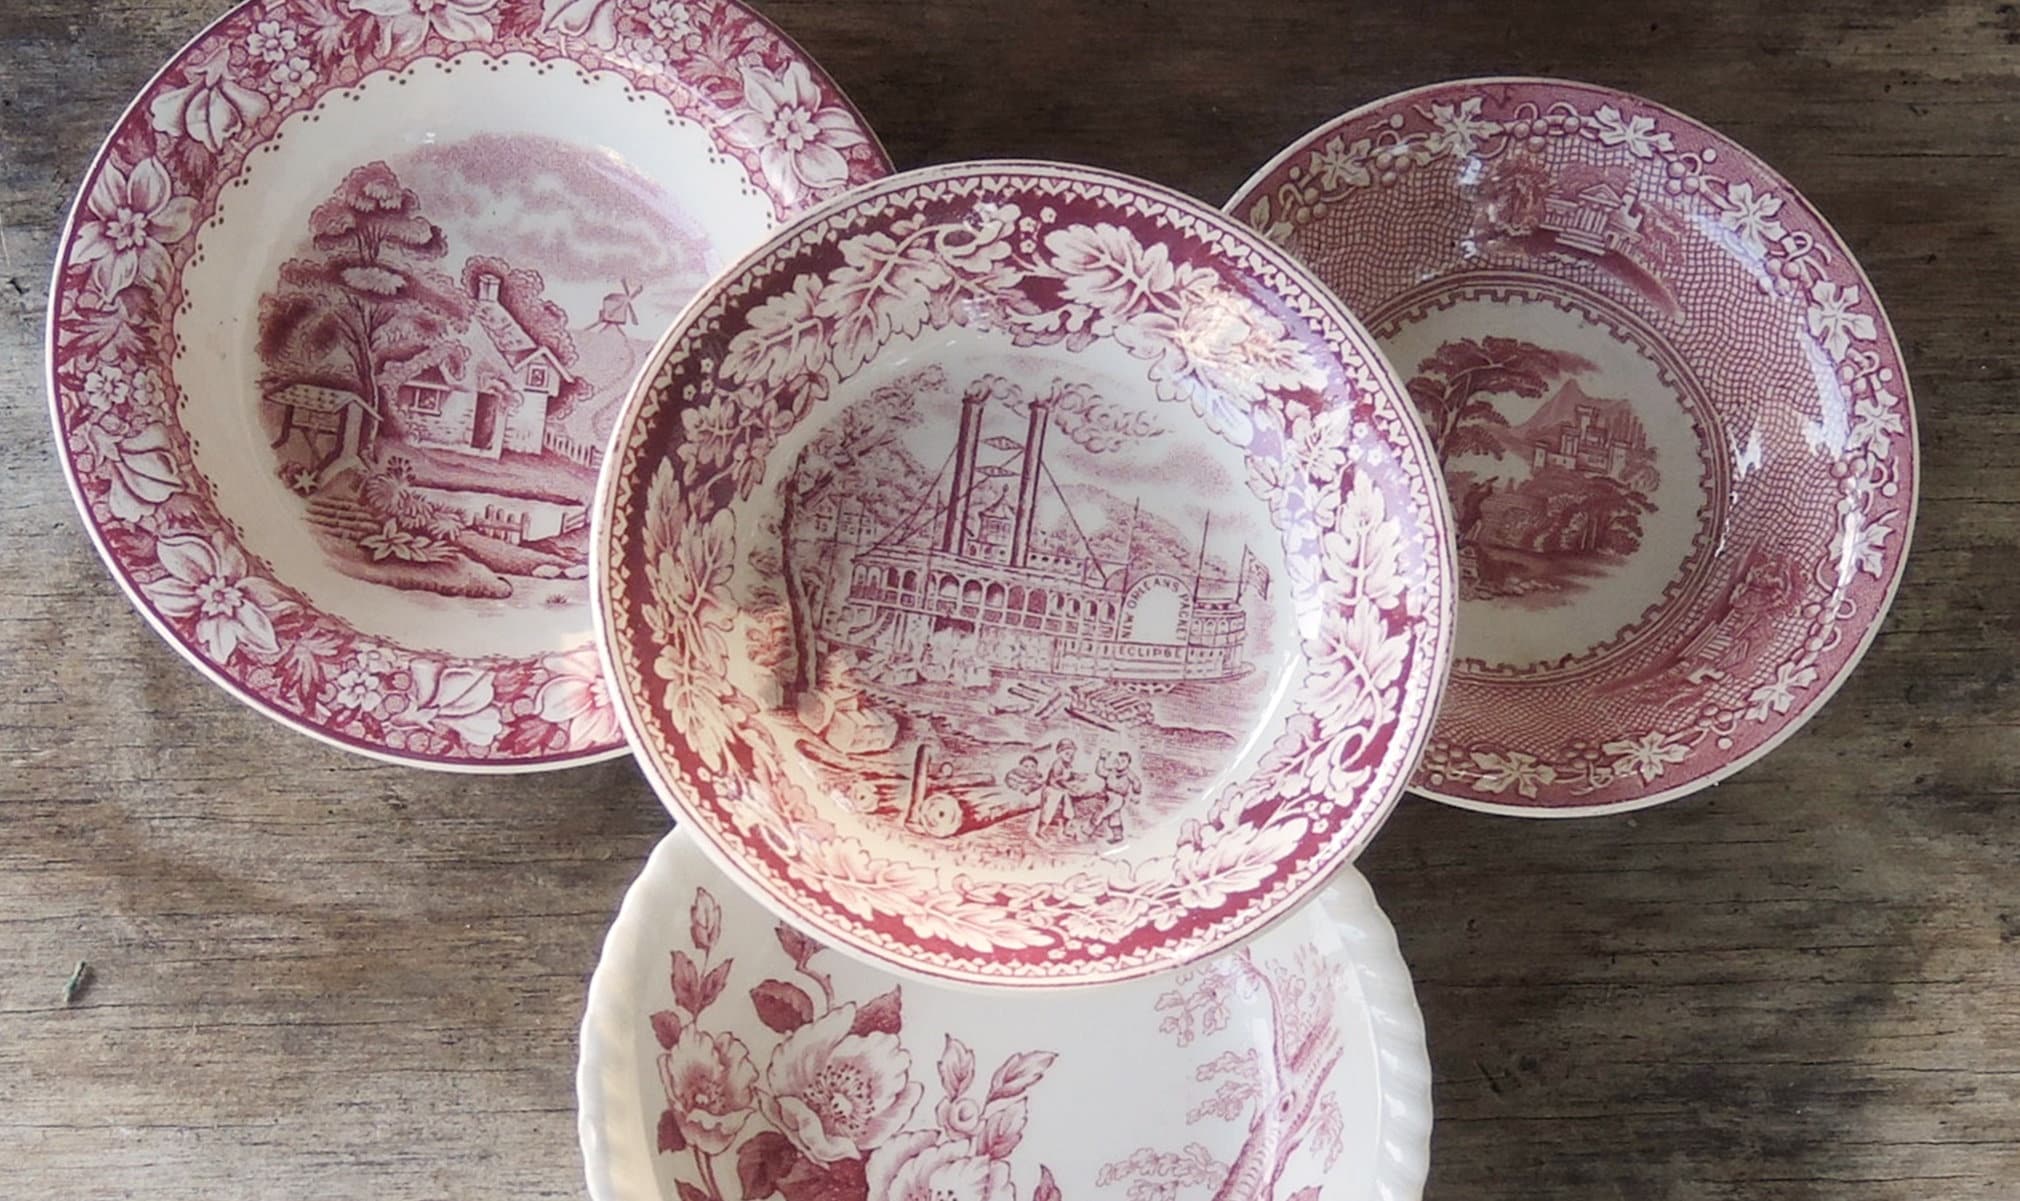 Longaberger Pottery Woven Traditions Red Covered Sugar - Ruby Lane